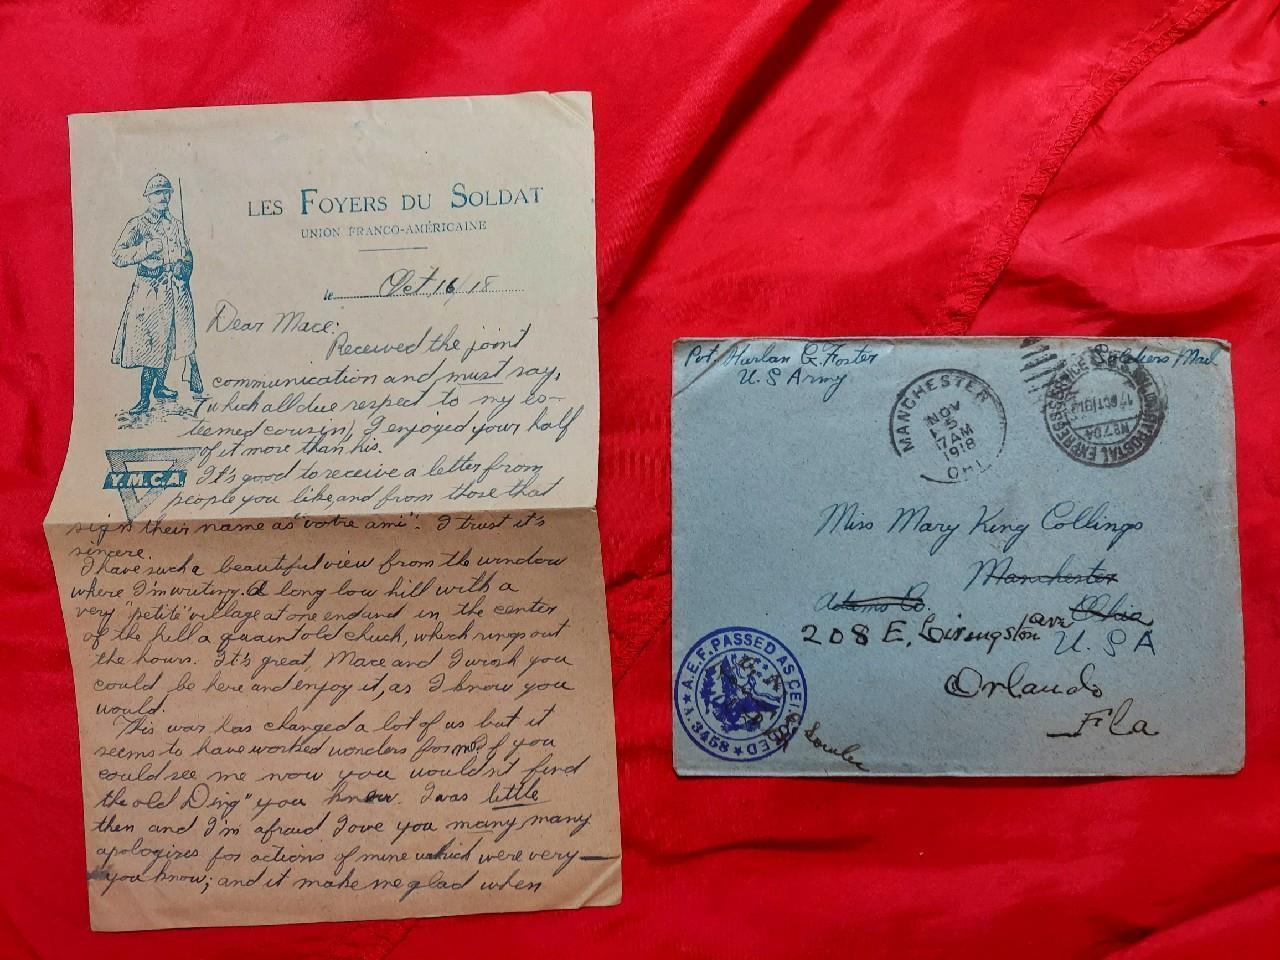 World War 1 Letter Harlan Foster to Mary King Collings Adams Co. Ohio Orlando,Fl